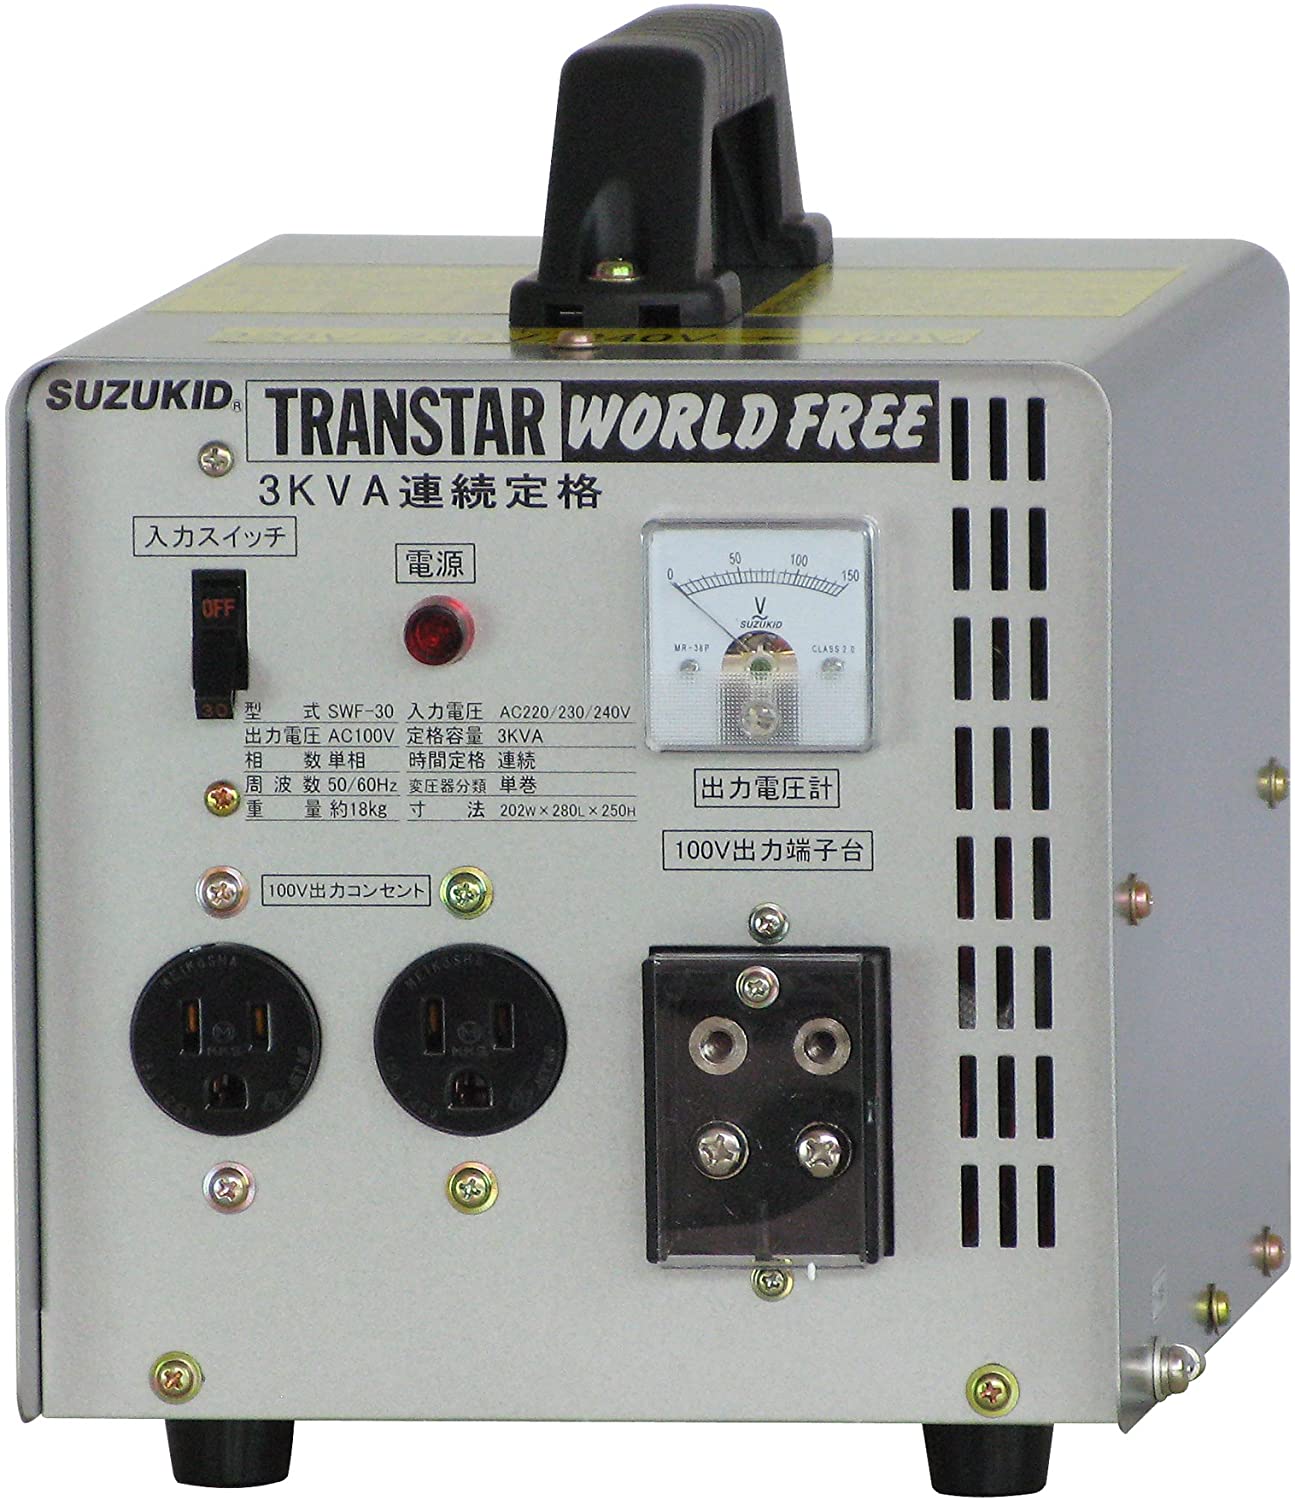 Electric Welding Machine, Portable Power Transformer, Transtar World Free Rated 3 KVA Continuous Type